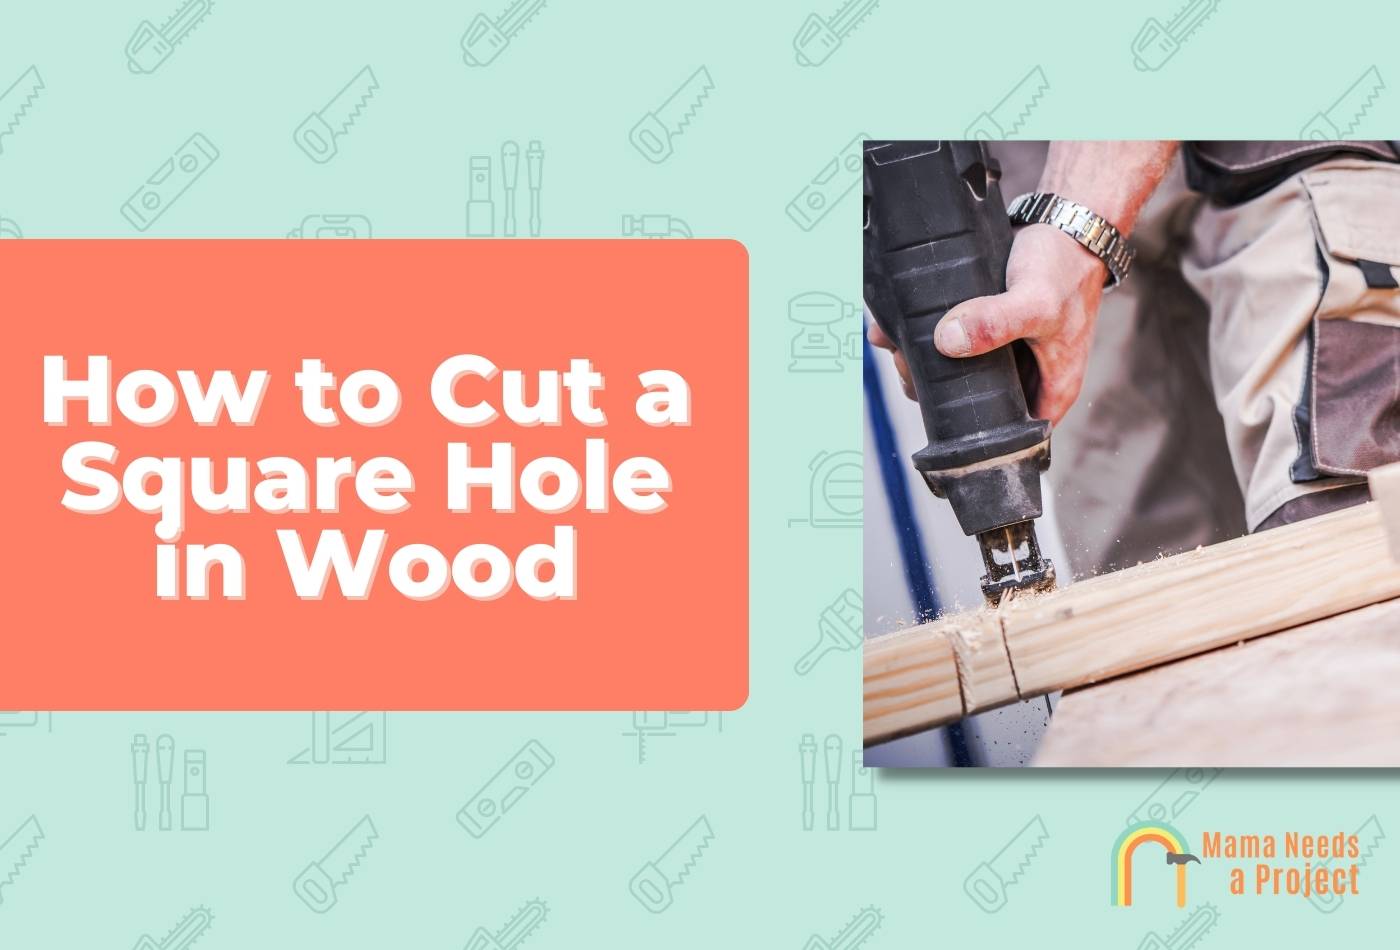 Cut Square Hole in Wood